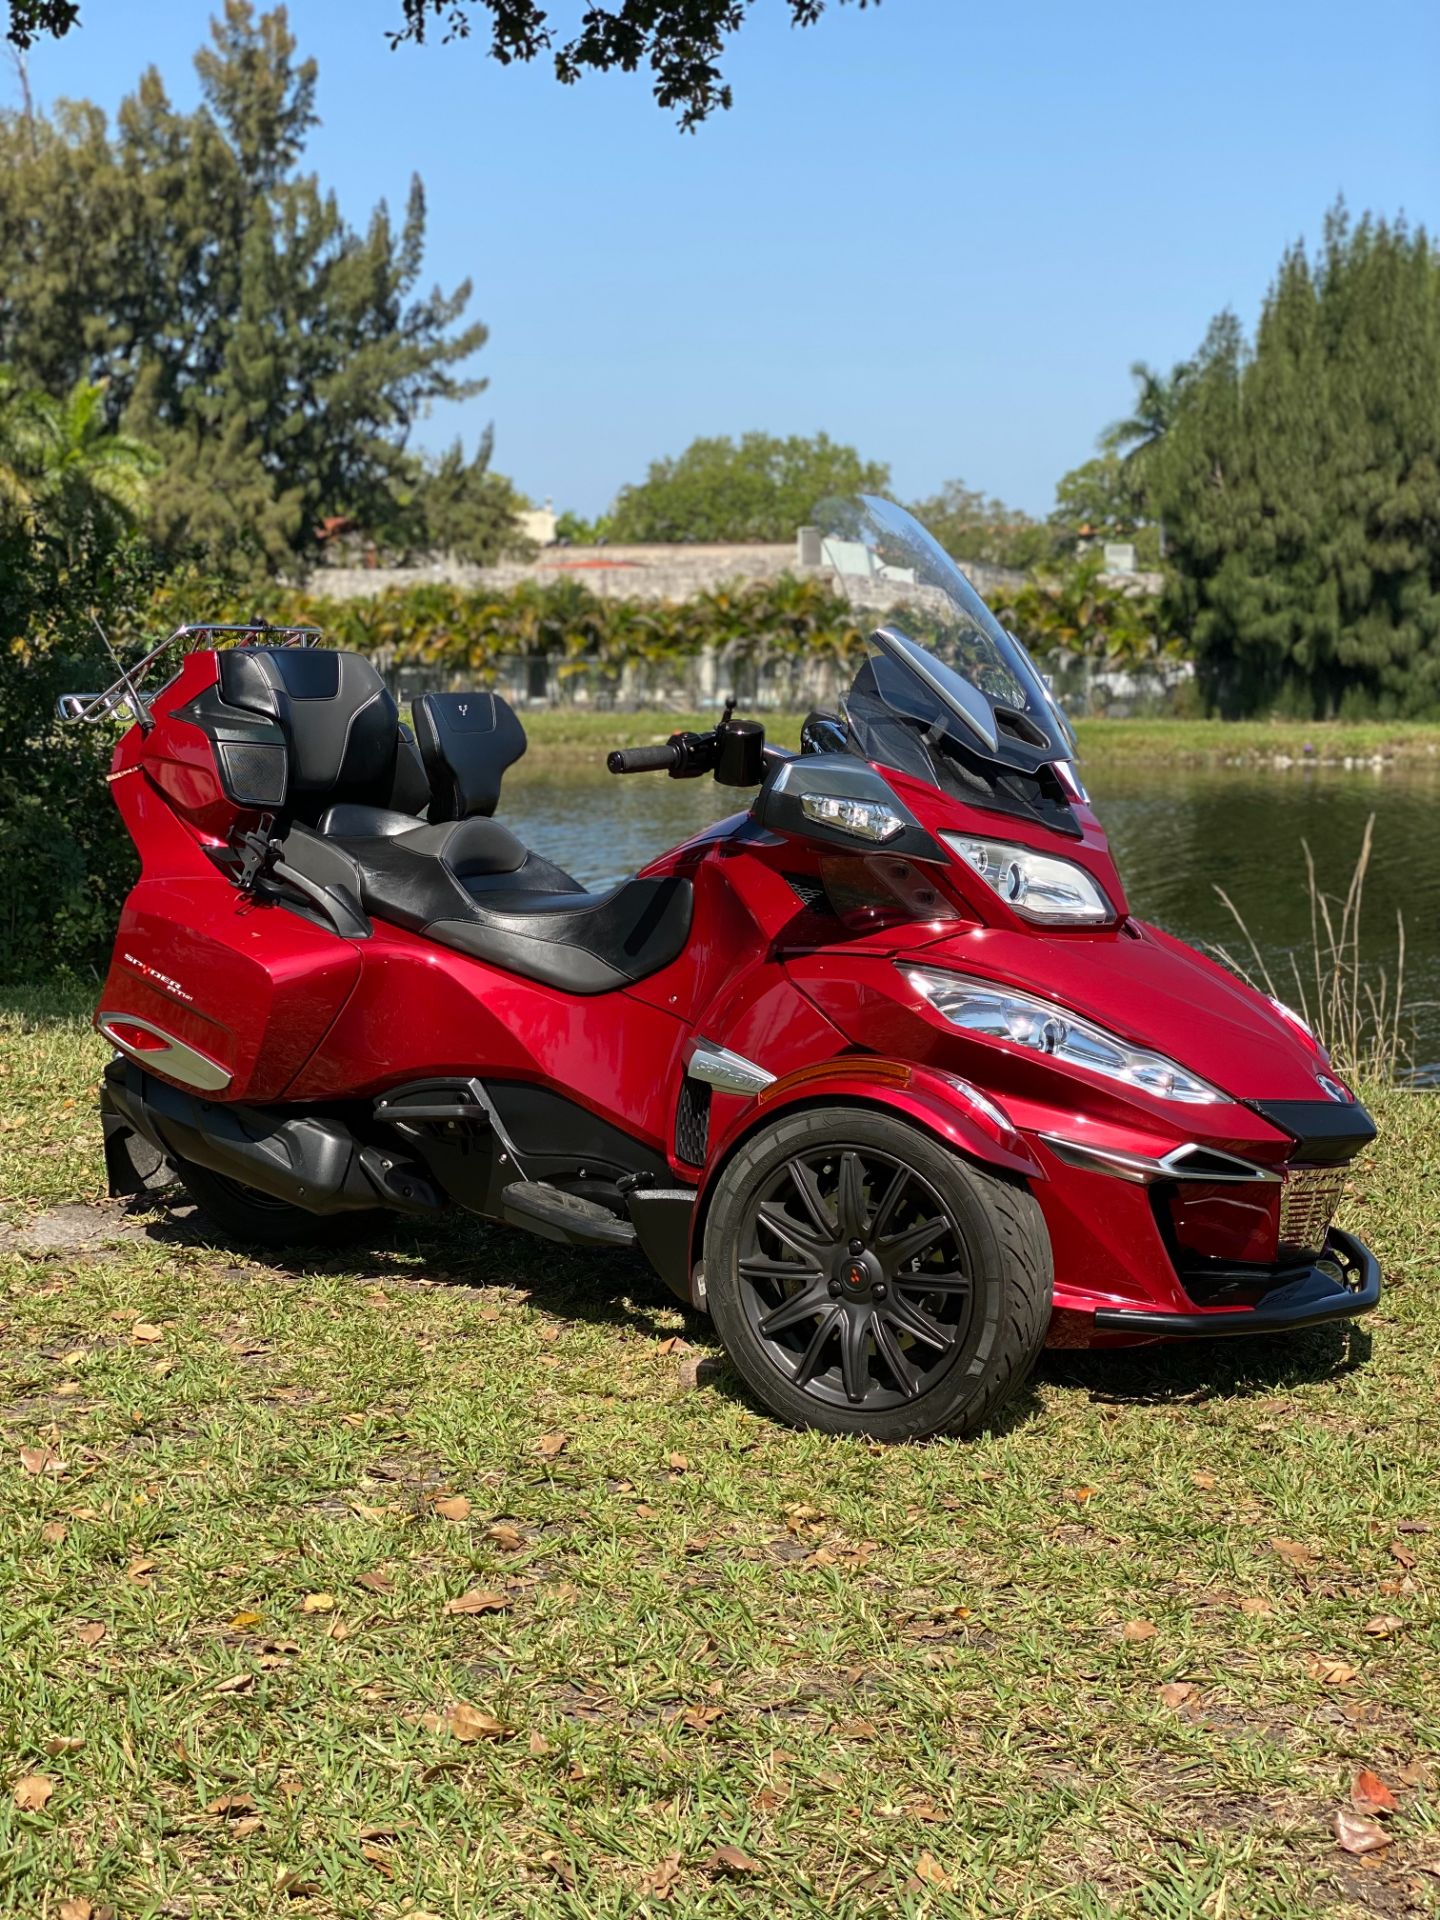 2016 Can-Am Spyder RT-S SE6 in North Miami Beach, Florida - Photo 2